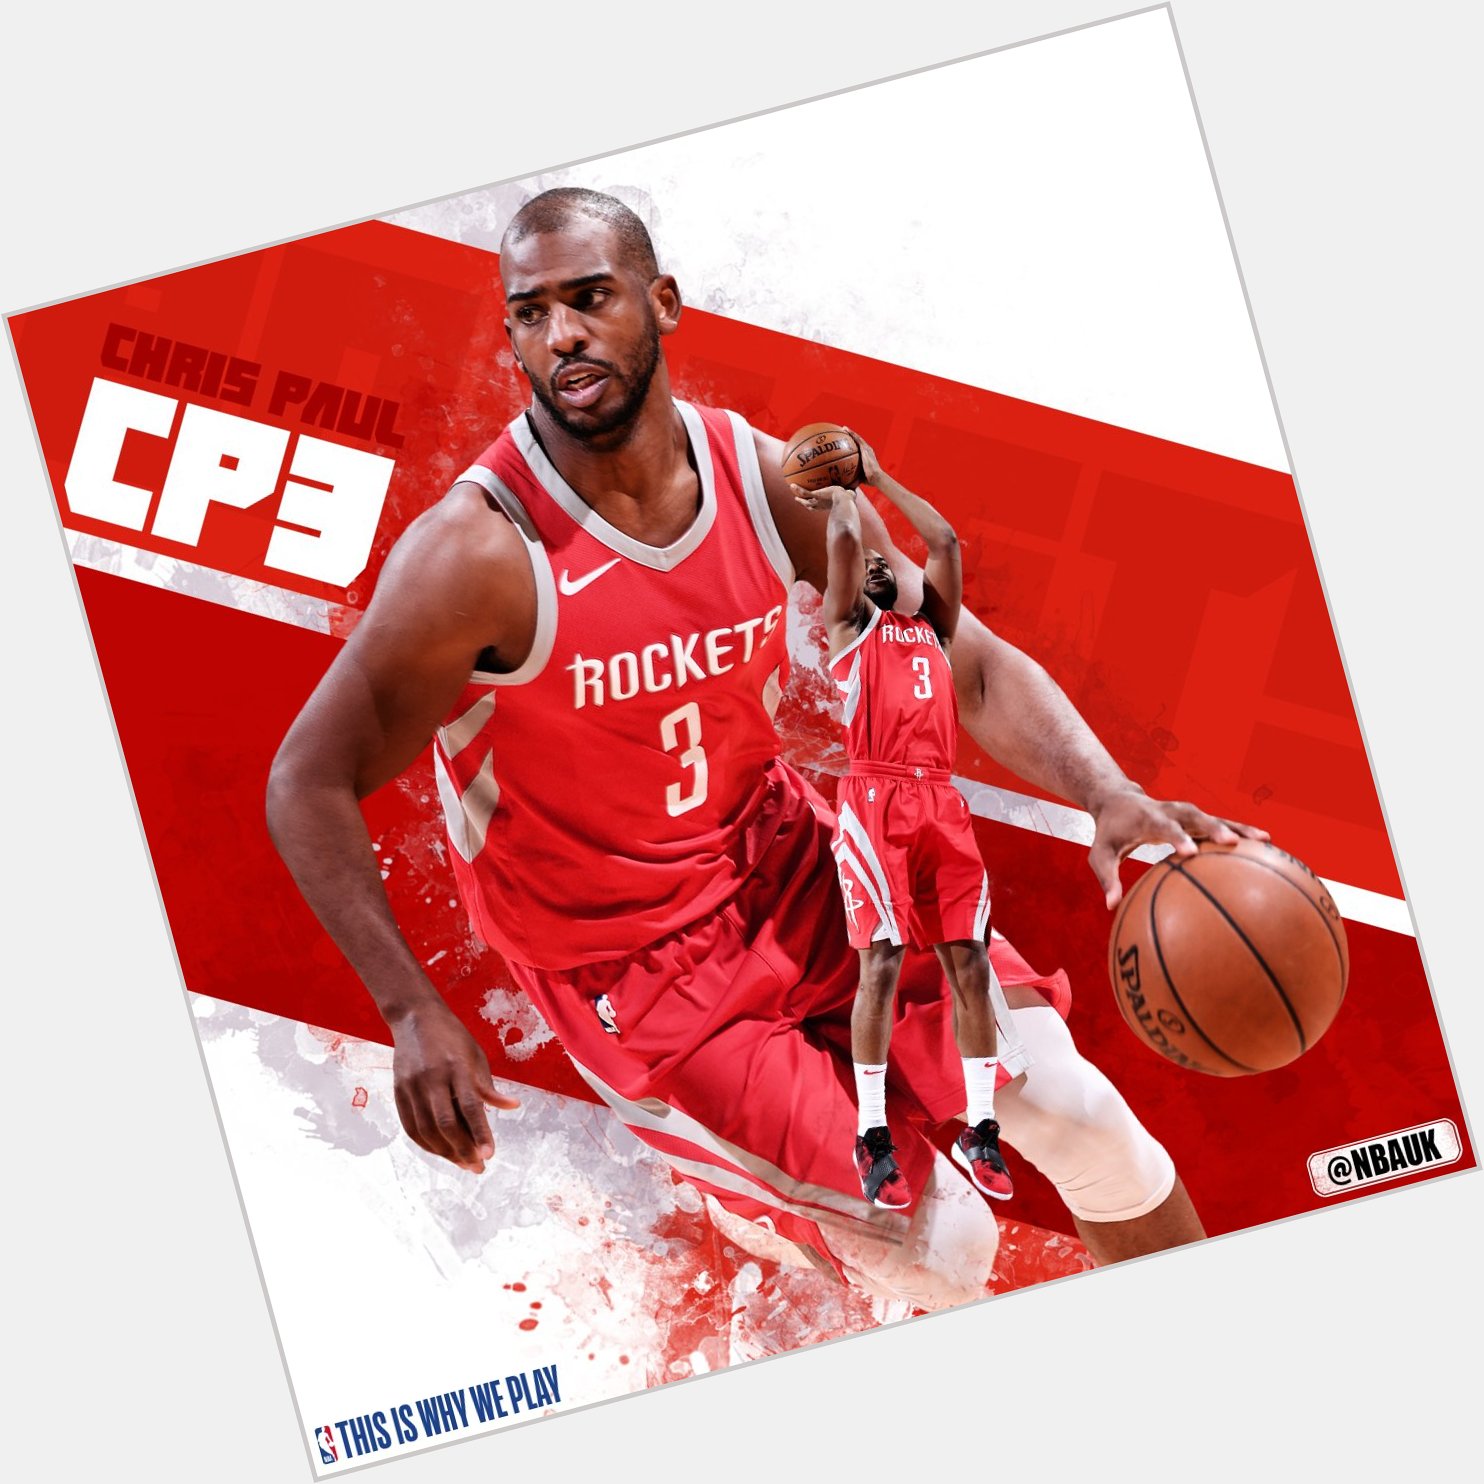 Join us as we wish 9x NBA All-Star, Chris Paul a very happy birthday!   